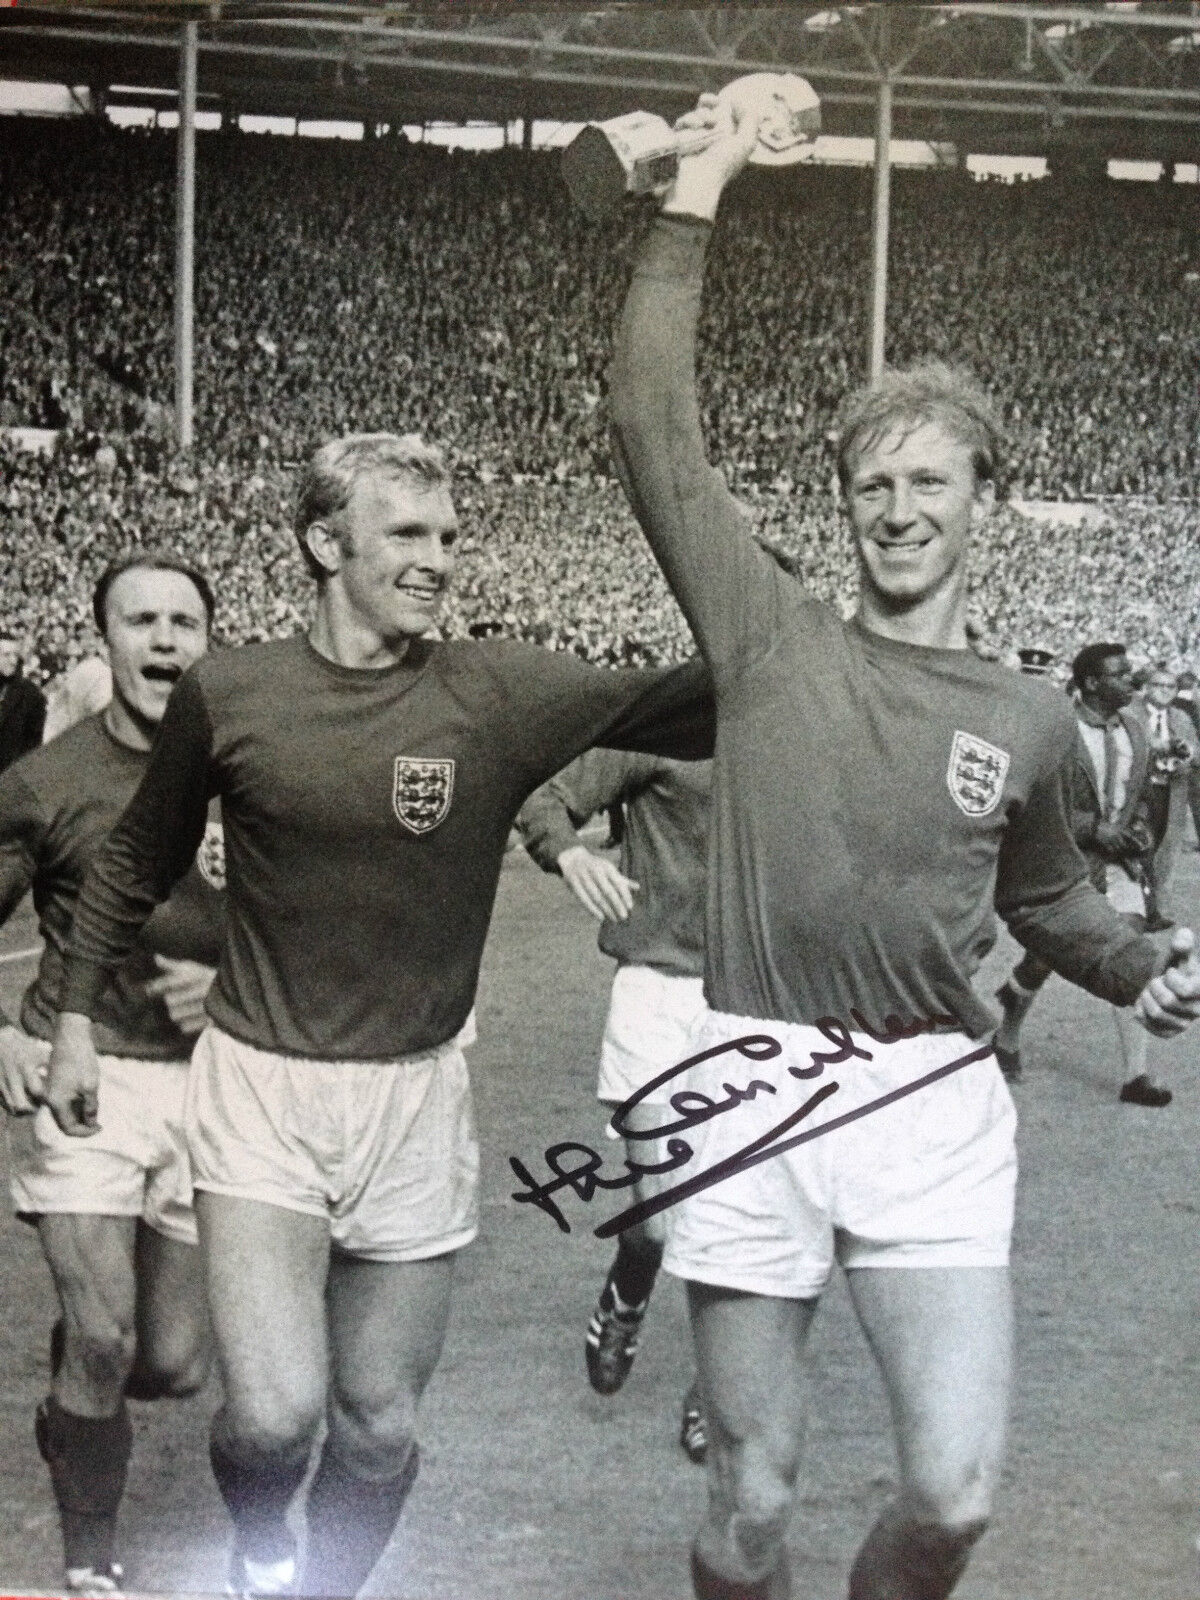 JACK CHARLTON - LEEDS & ENGLAND DEFENDER - SIGNED B/W WORLD CUP Photo Poster paintingGRAPH